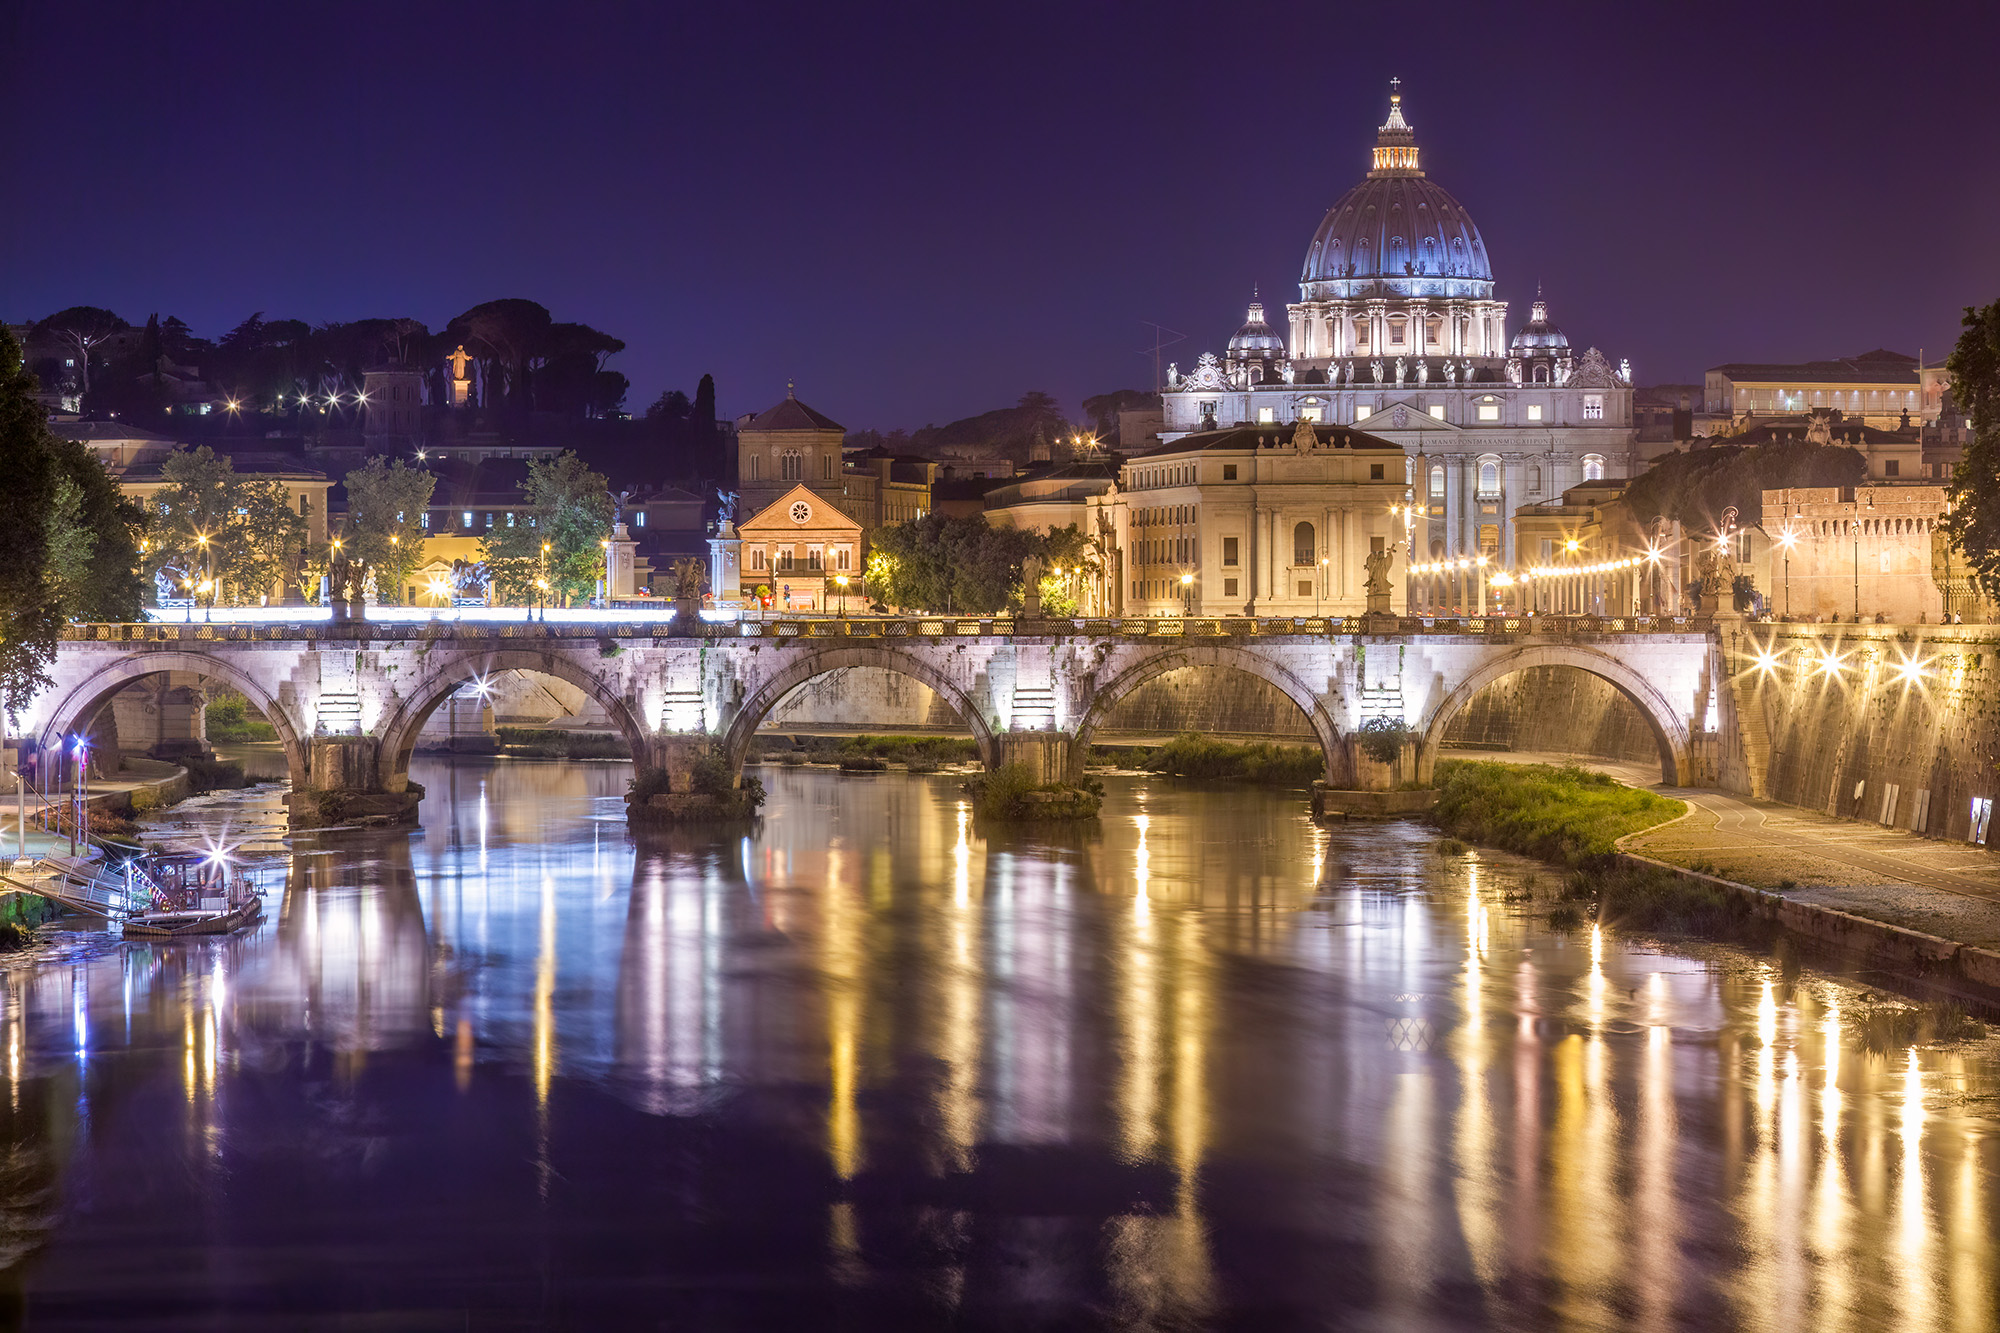 In this nocturnal vista of the Vatican from Rome, the St. Angelo Bridge spans the tranquil Tiber River. Gazing towards the Vatican...